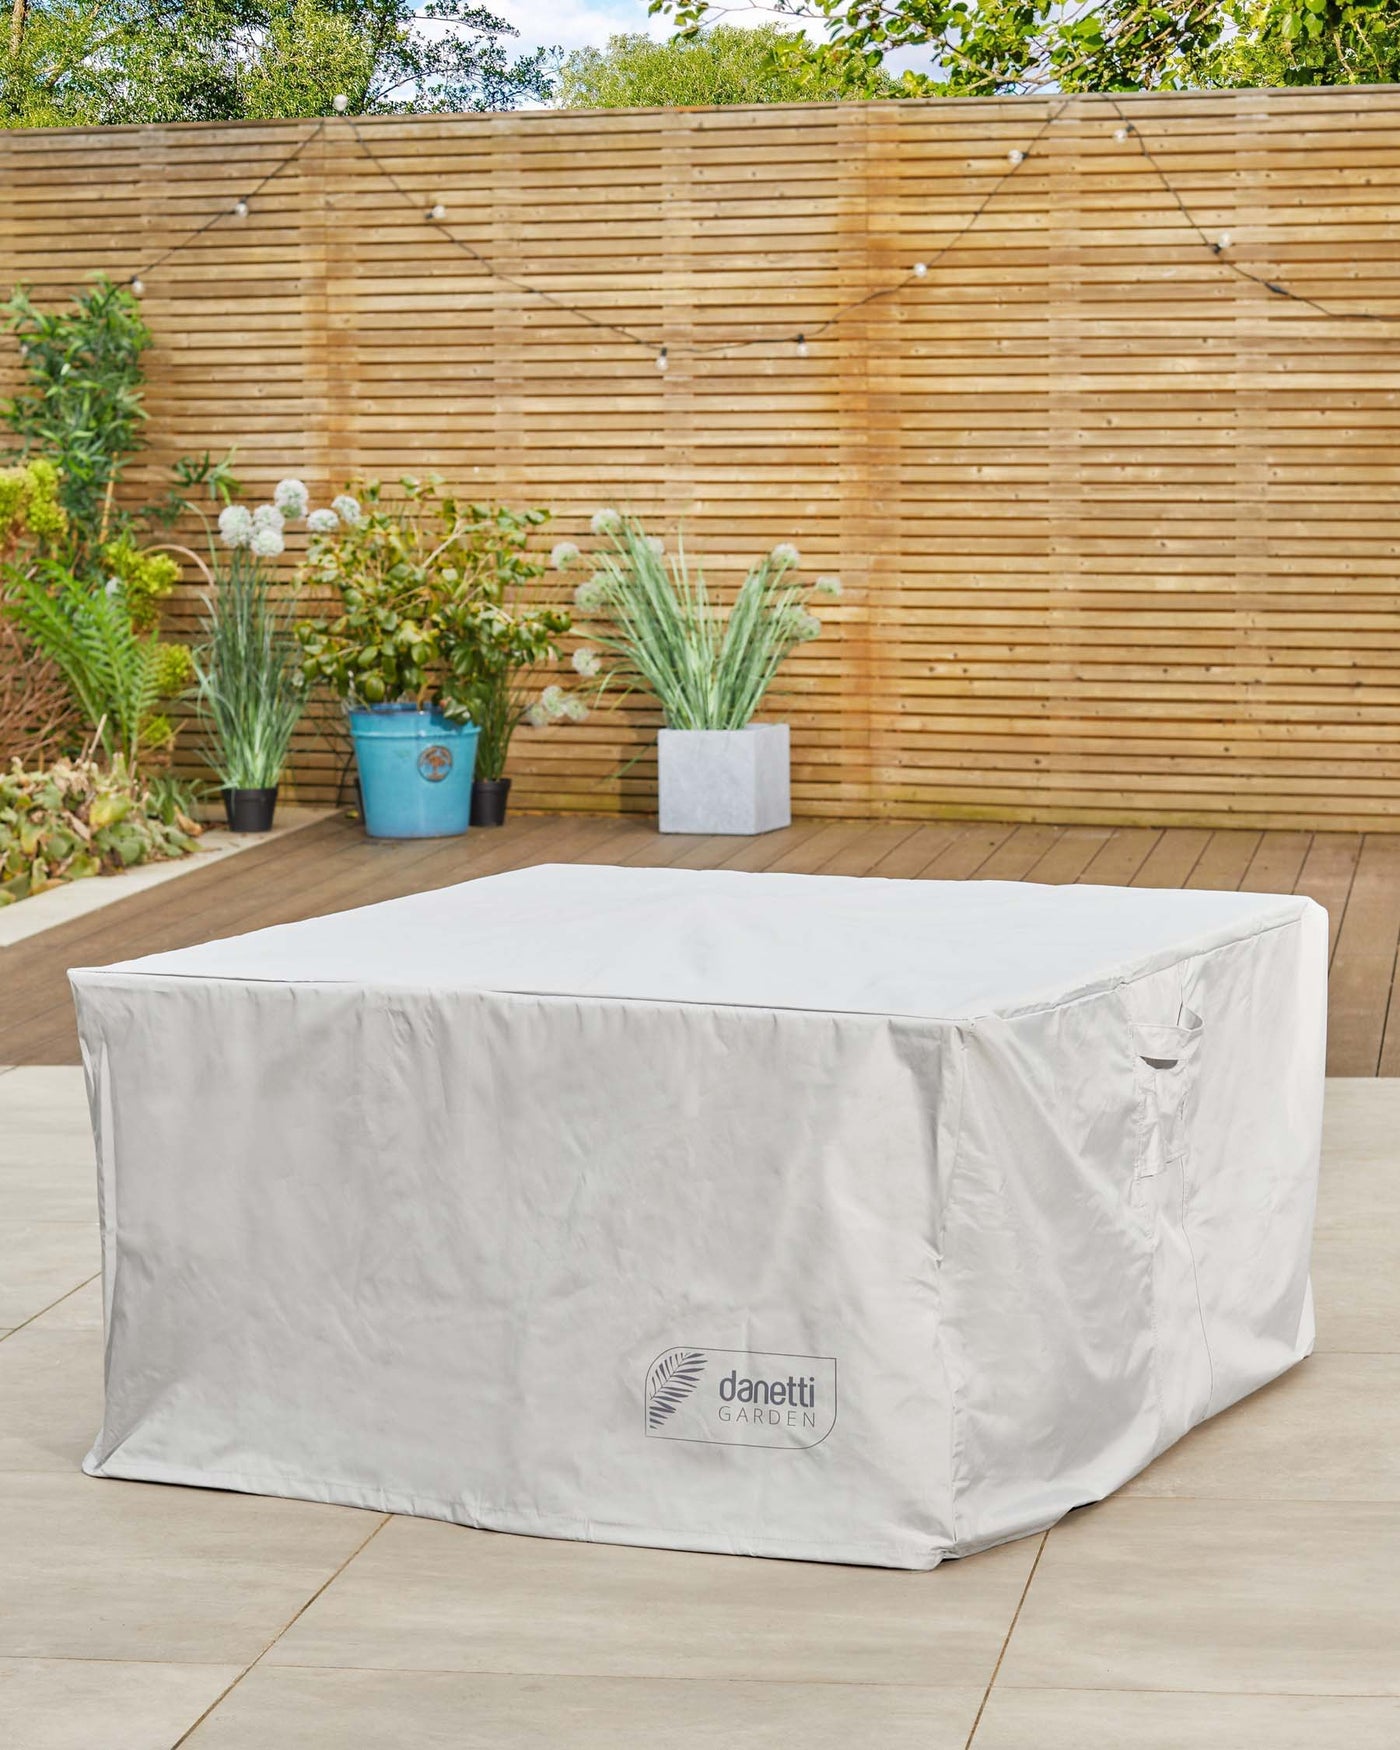 Outdoor furniture with a tailored protective cover in a garden setting.